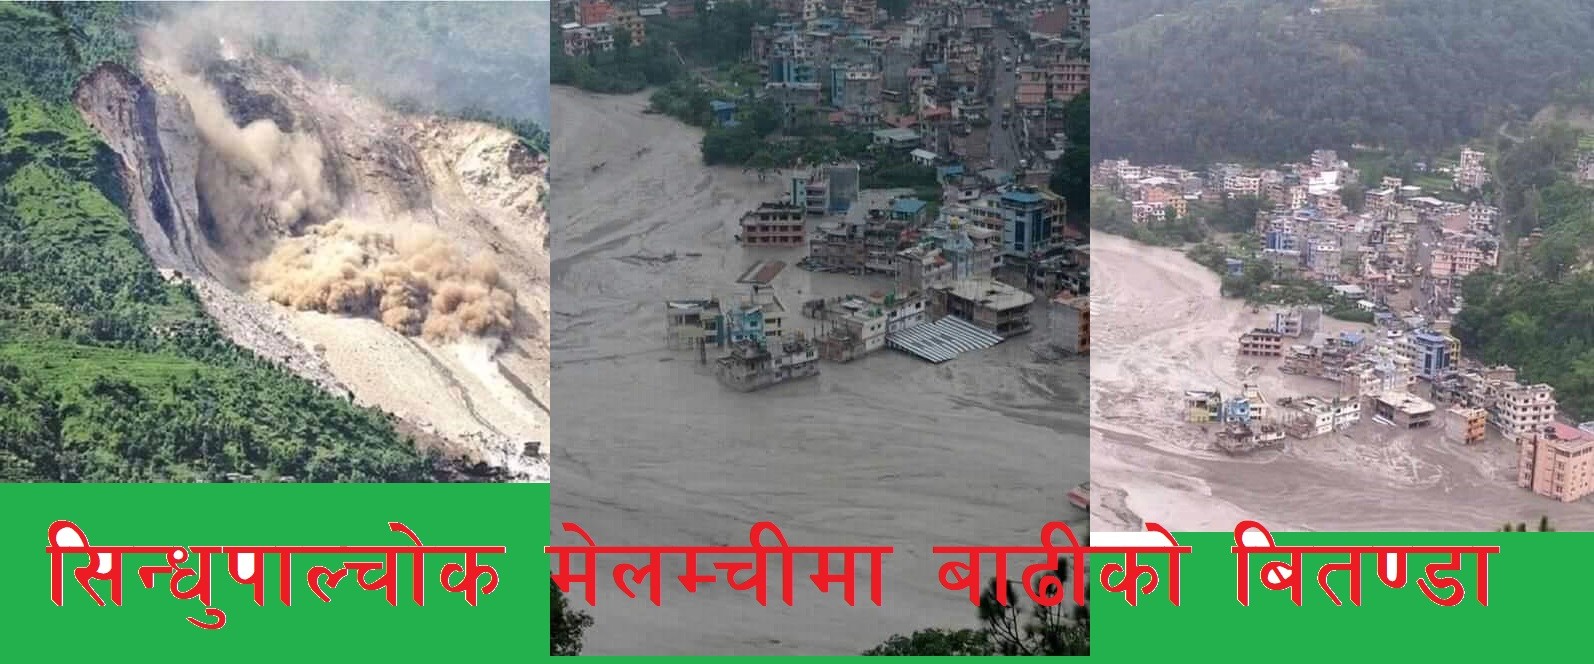 Flooded in Melamchi, Sindhupalchowk: Seven people died and more than 50 are missing